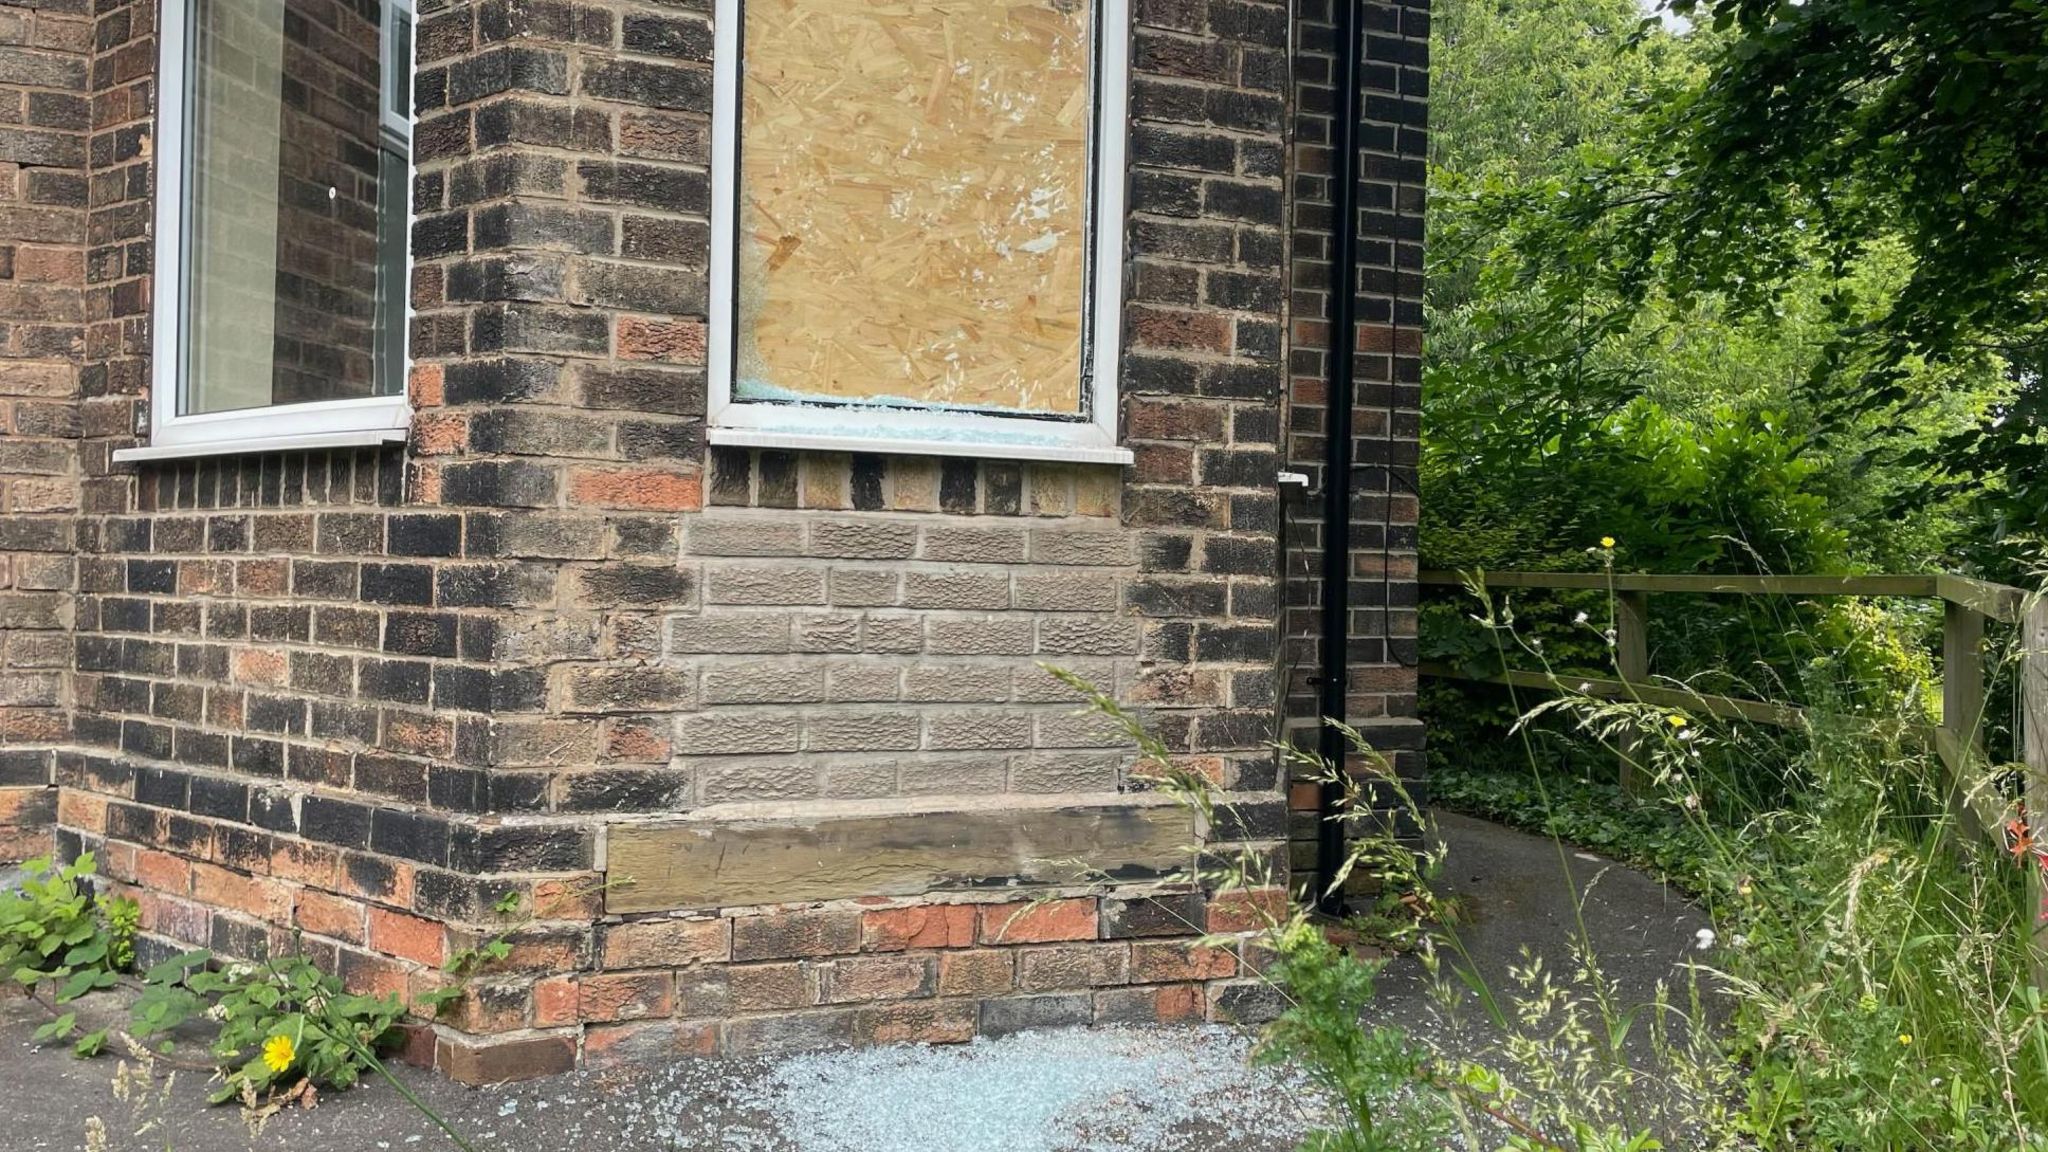 A window is boarded up with broken glass scatted on the ground below